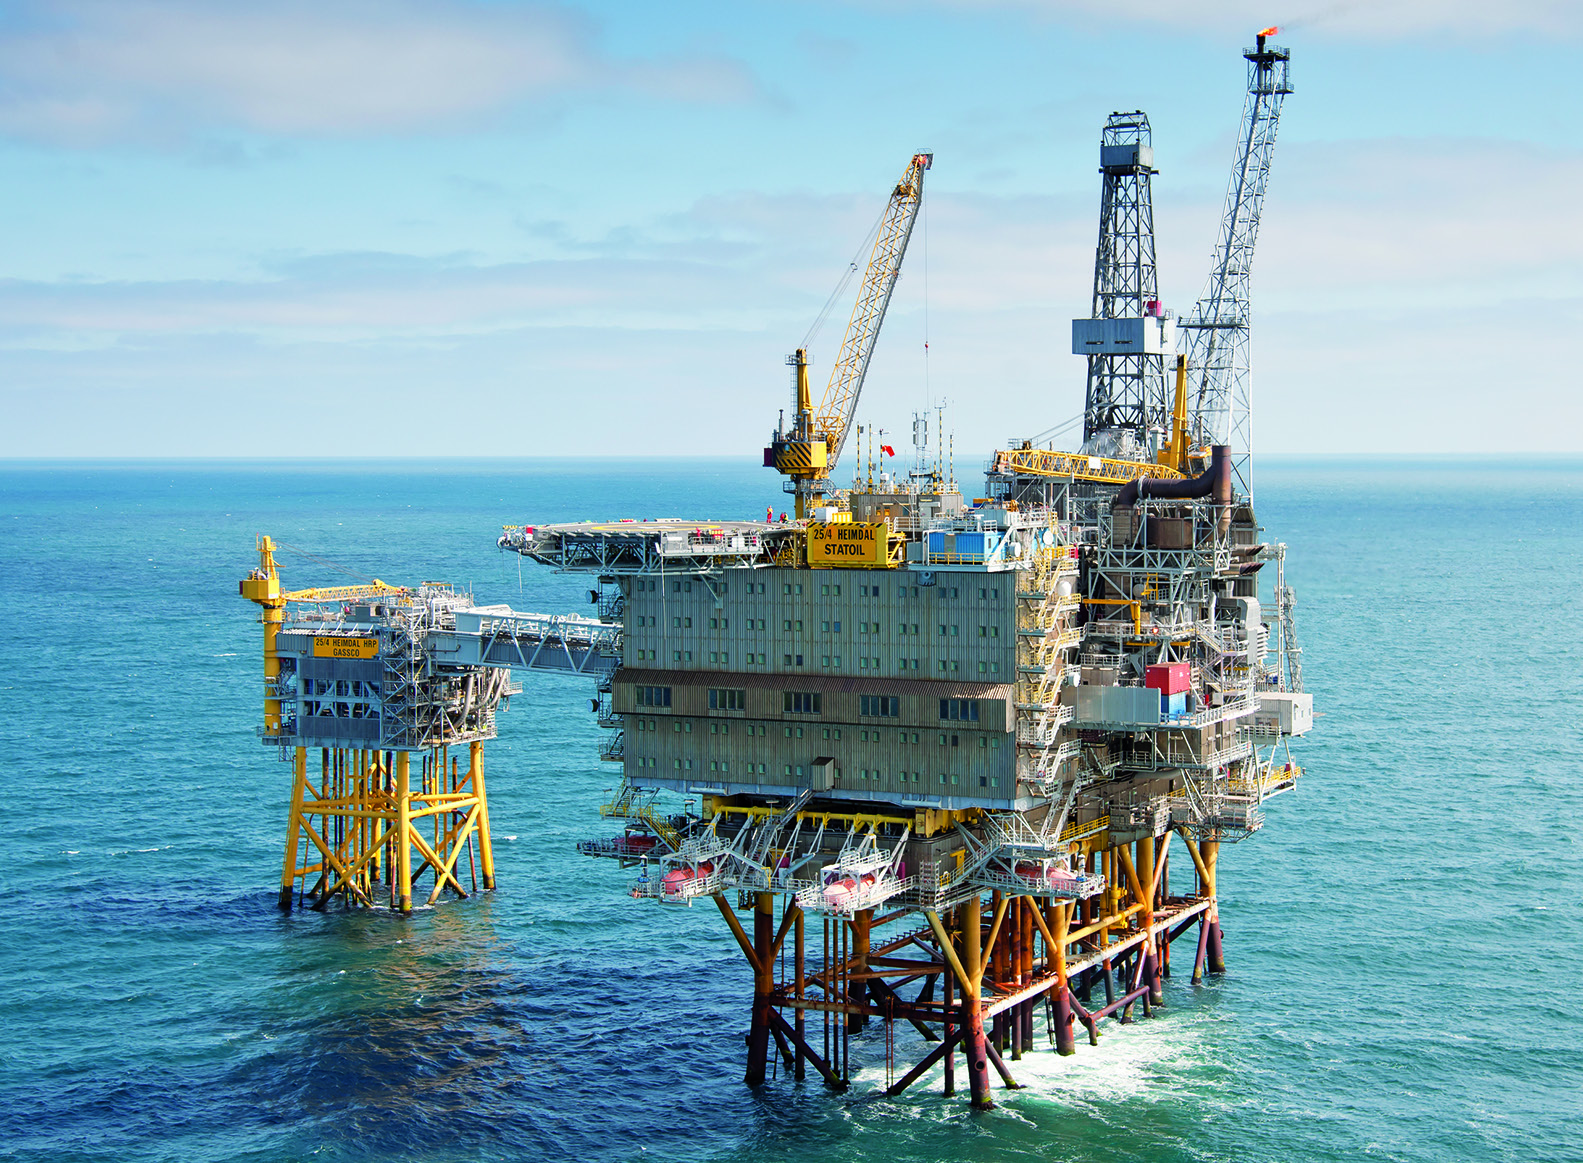 OFFSHORE PRODUCTION AND STORAGE INSTALLATIONS